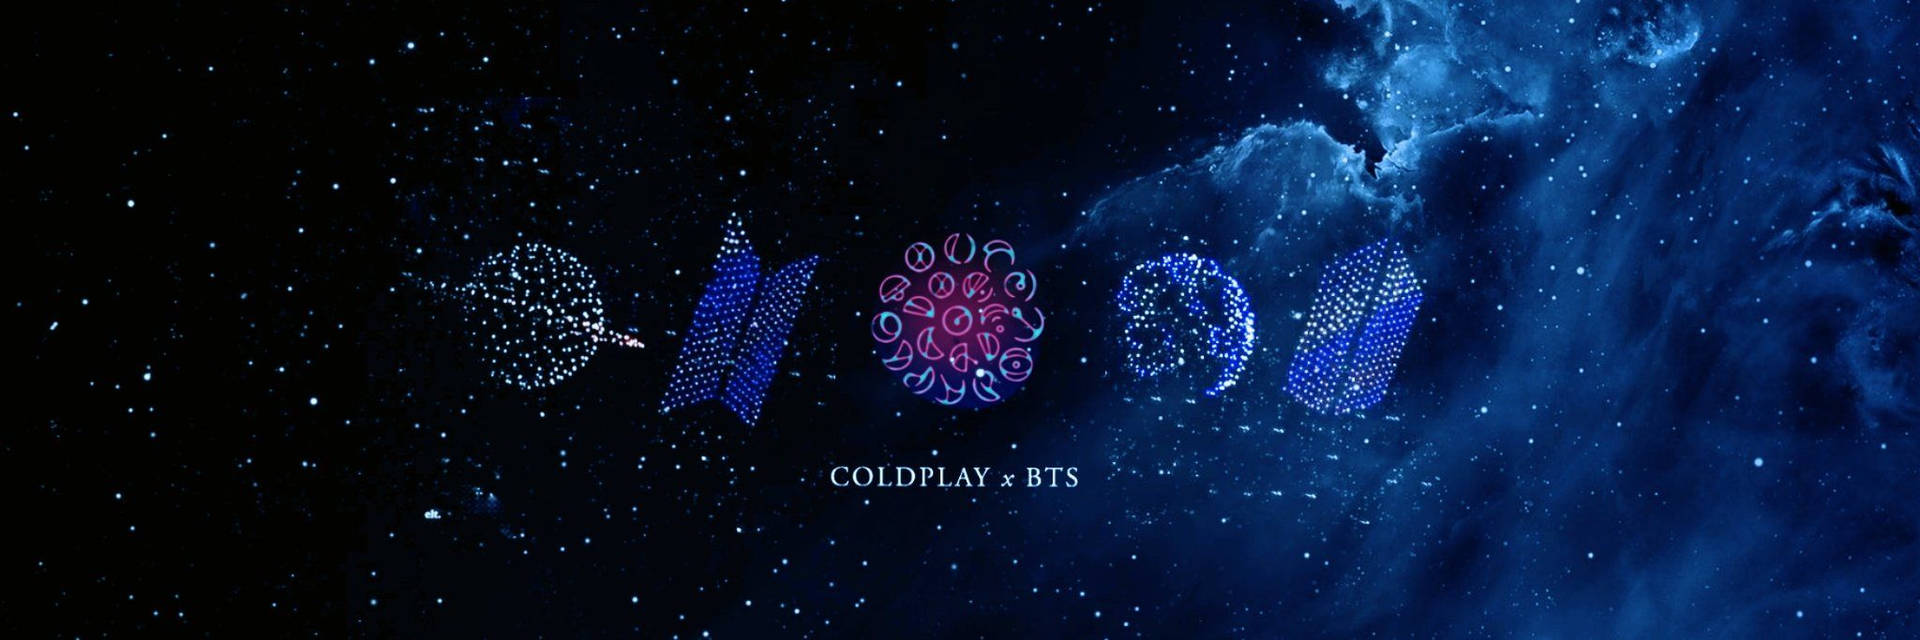 Coldplay And Bts With Stars Twitter Header